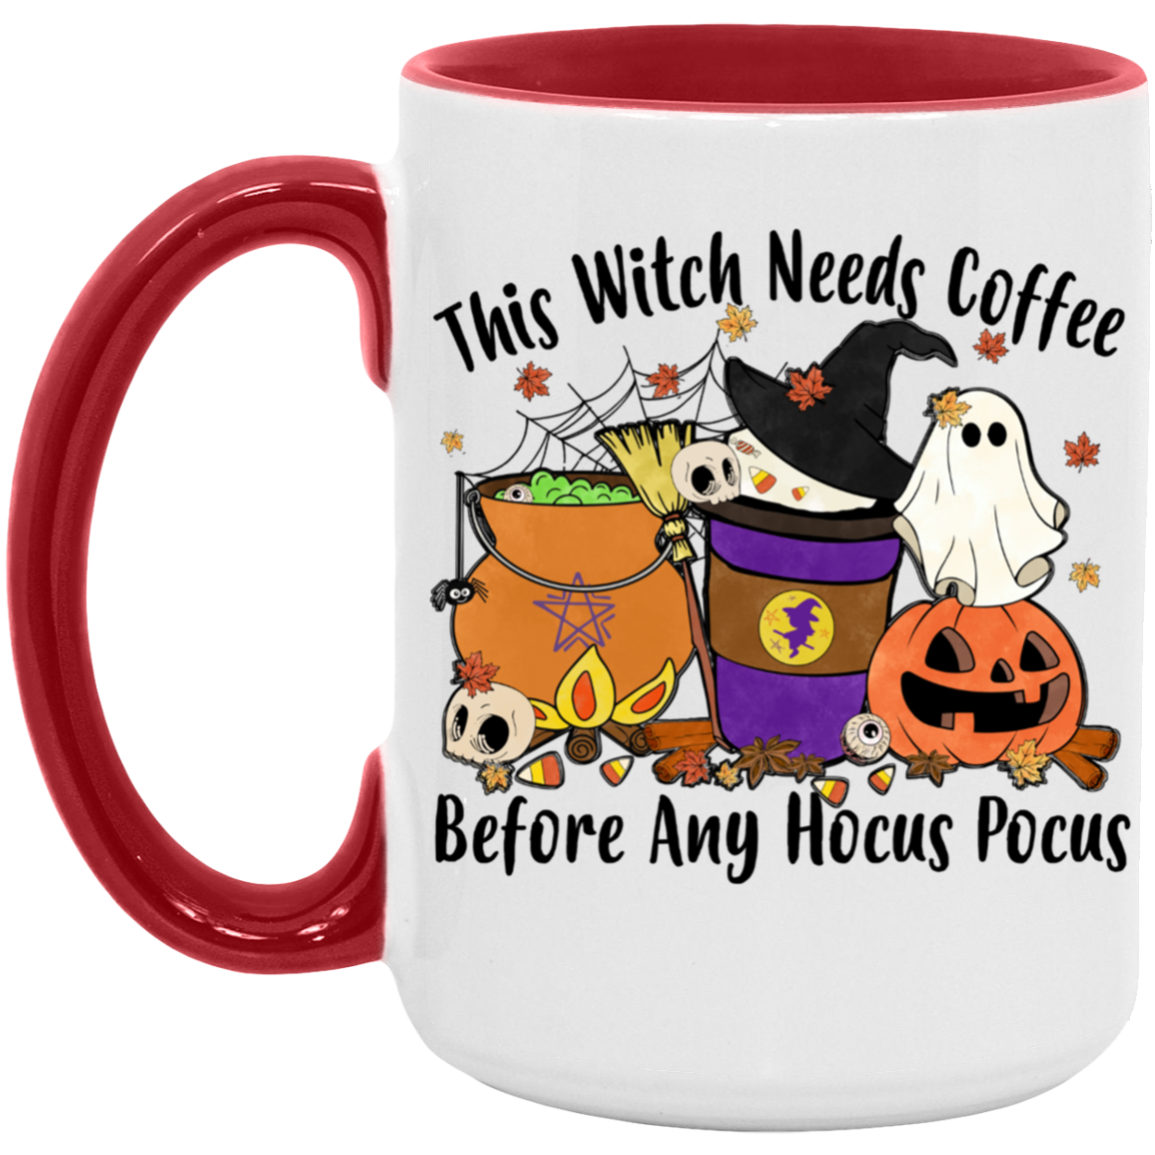 THIS WITCH NEEDS COFFEE 15oz. ACCENT MUG